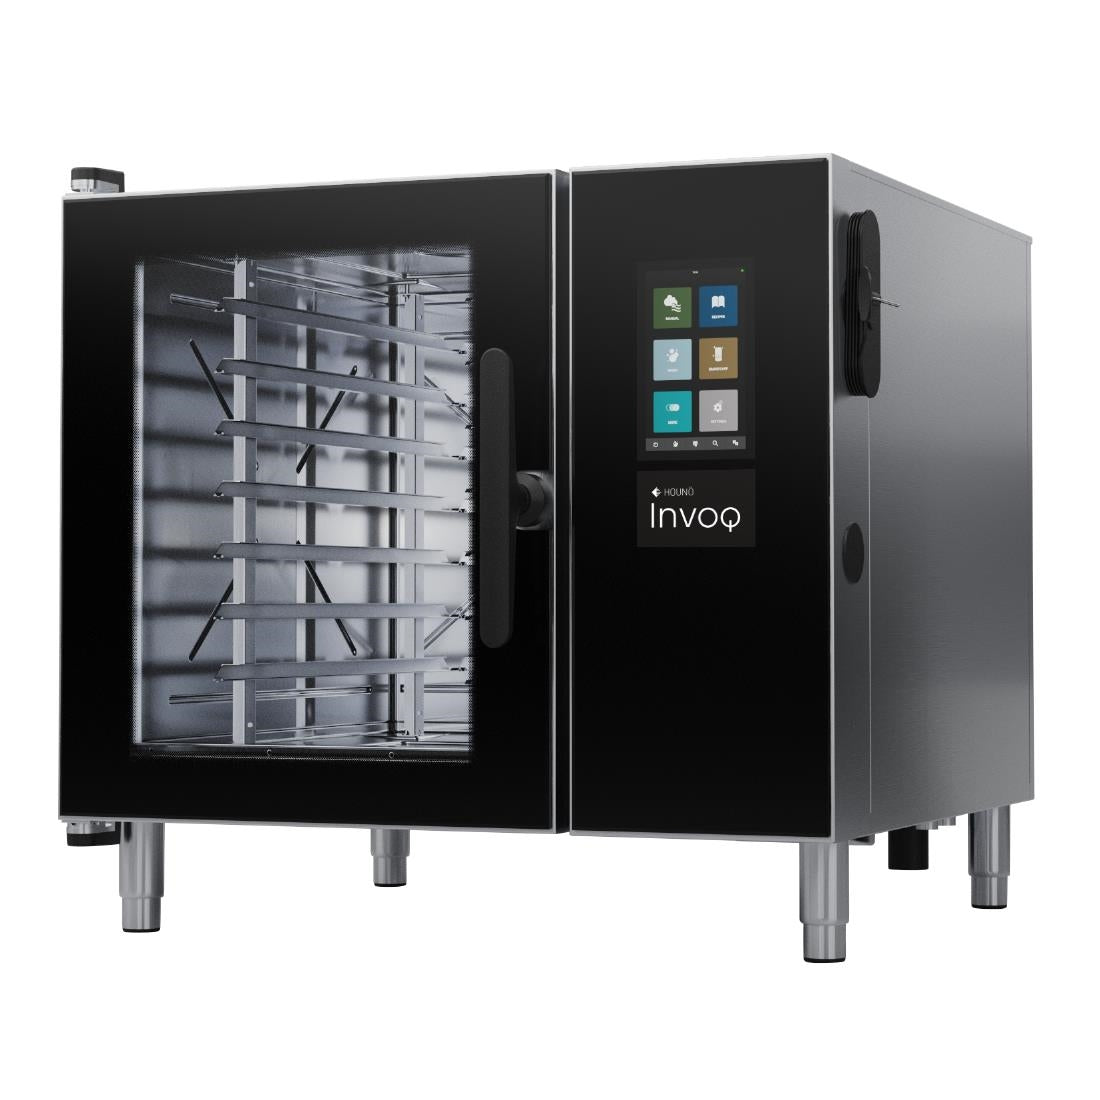 CX487 Houno Invoq Combi Oven Electric 6 Grid 1/1 GN JD Catering Equipment Solutions Ltd